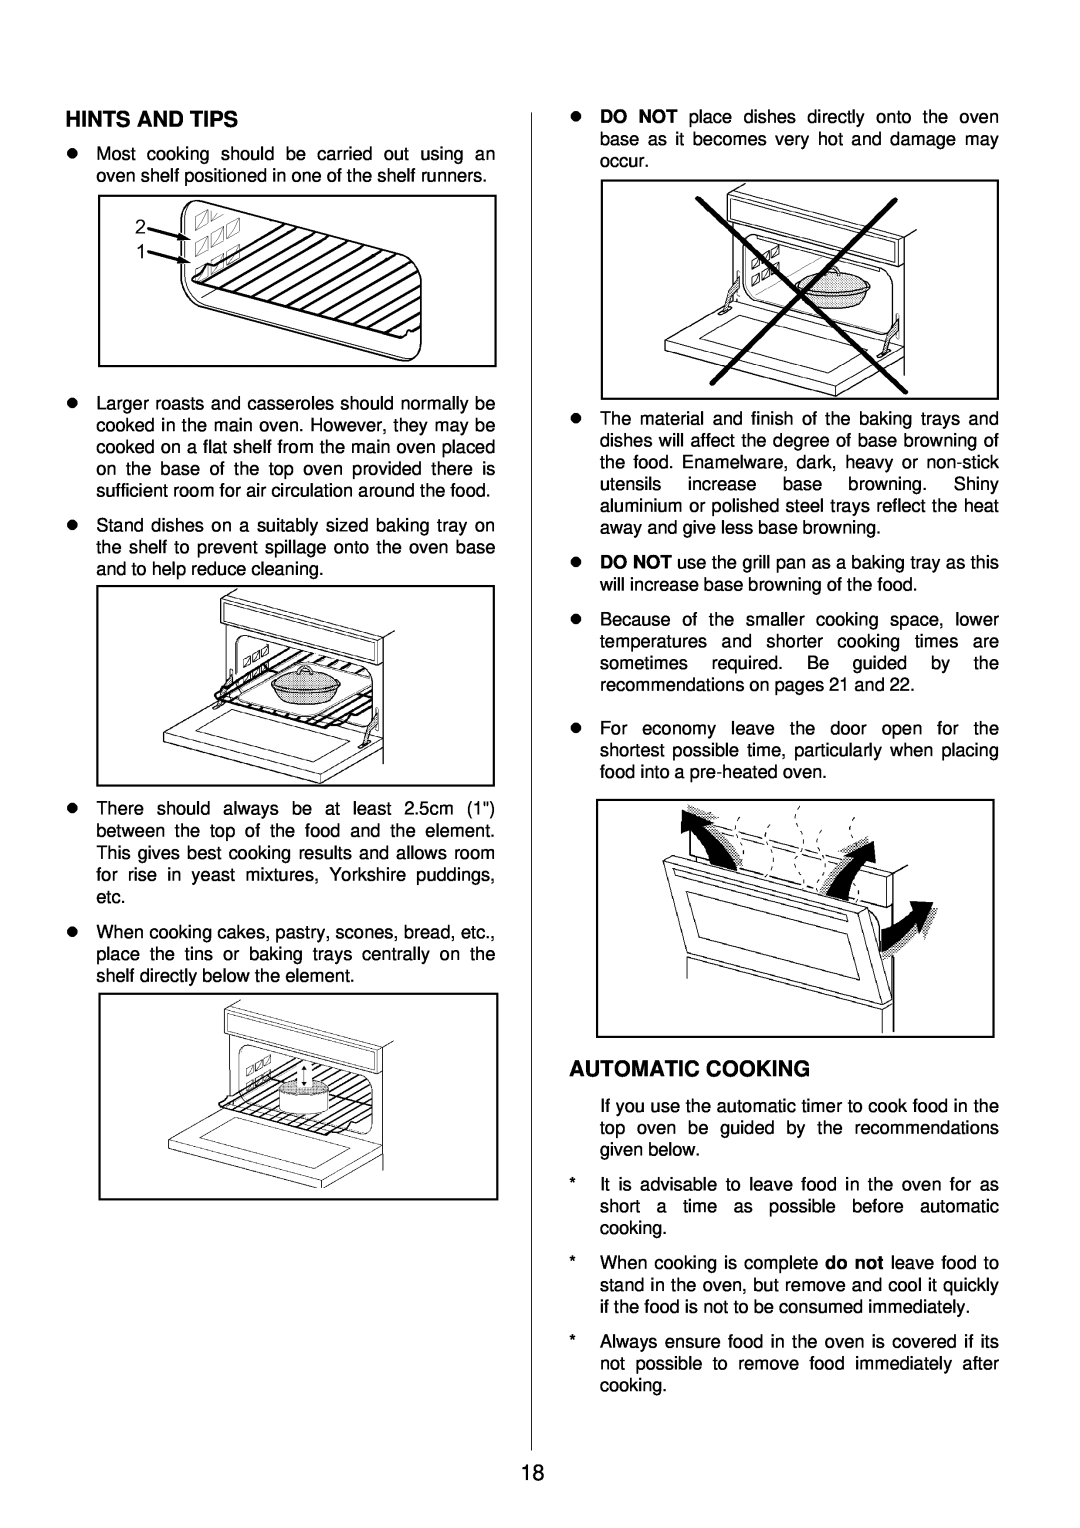 Tricity Bendix SI 453 installation instructions lHINTS AND TIPS, Automatic Cooking 